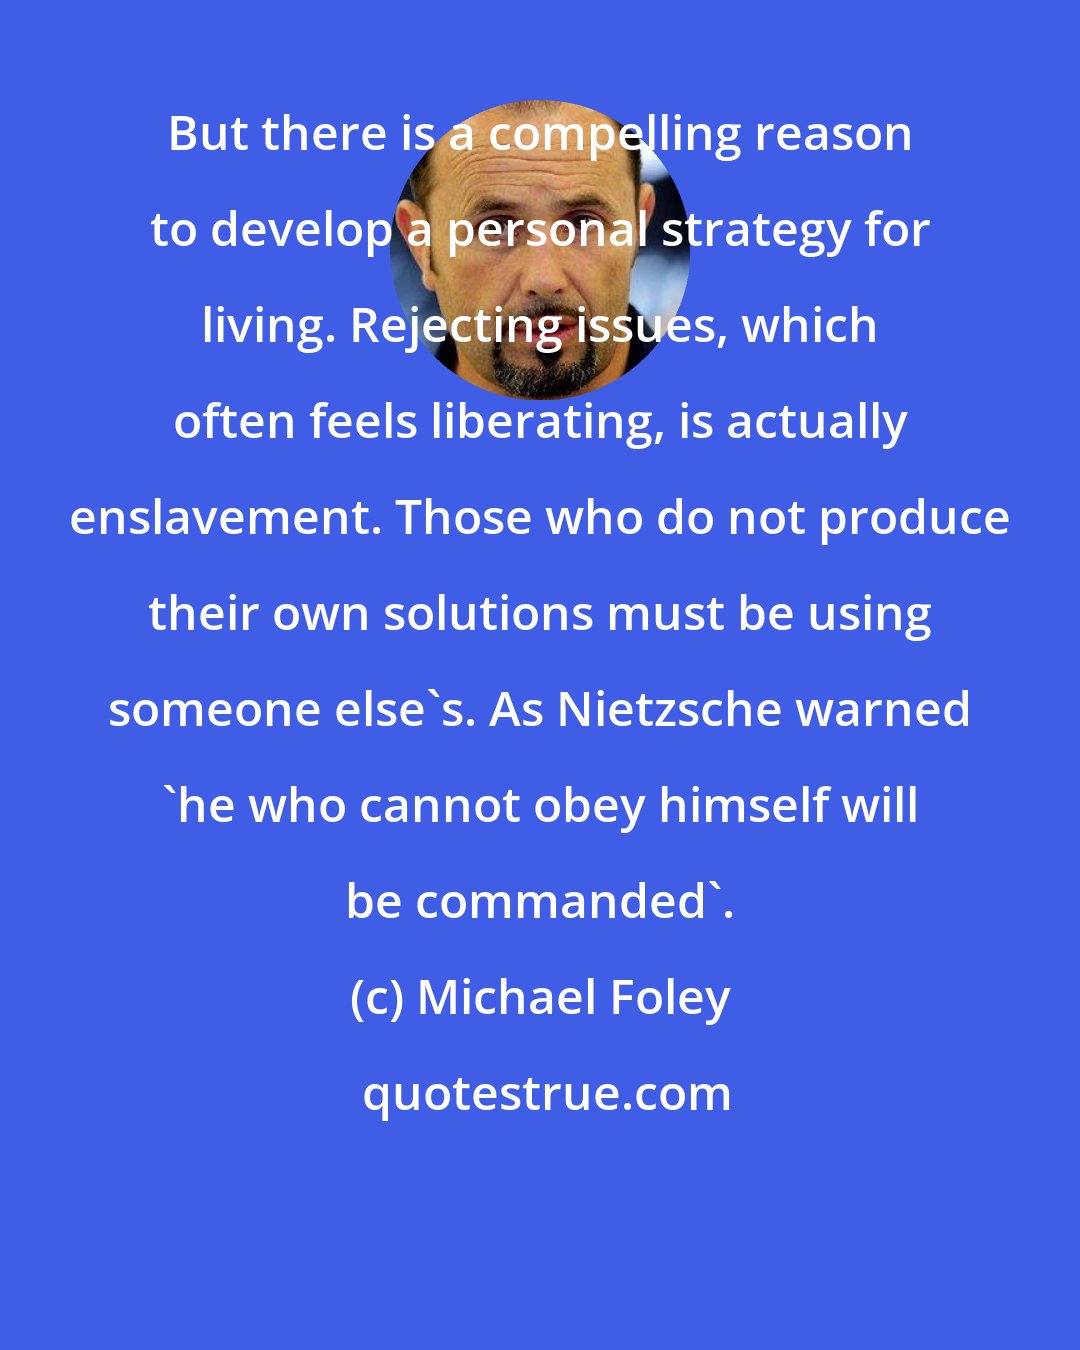 Michael Foley: But there is a compelling reason to develop a personal strategy for living. Rejecting issues, which often feels liberating, is actually enslavement. Those who do not produce their own solutions must be using someone else's. As Nietzsche warned 'he who cannot obey himself will be commanded'.